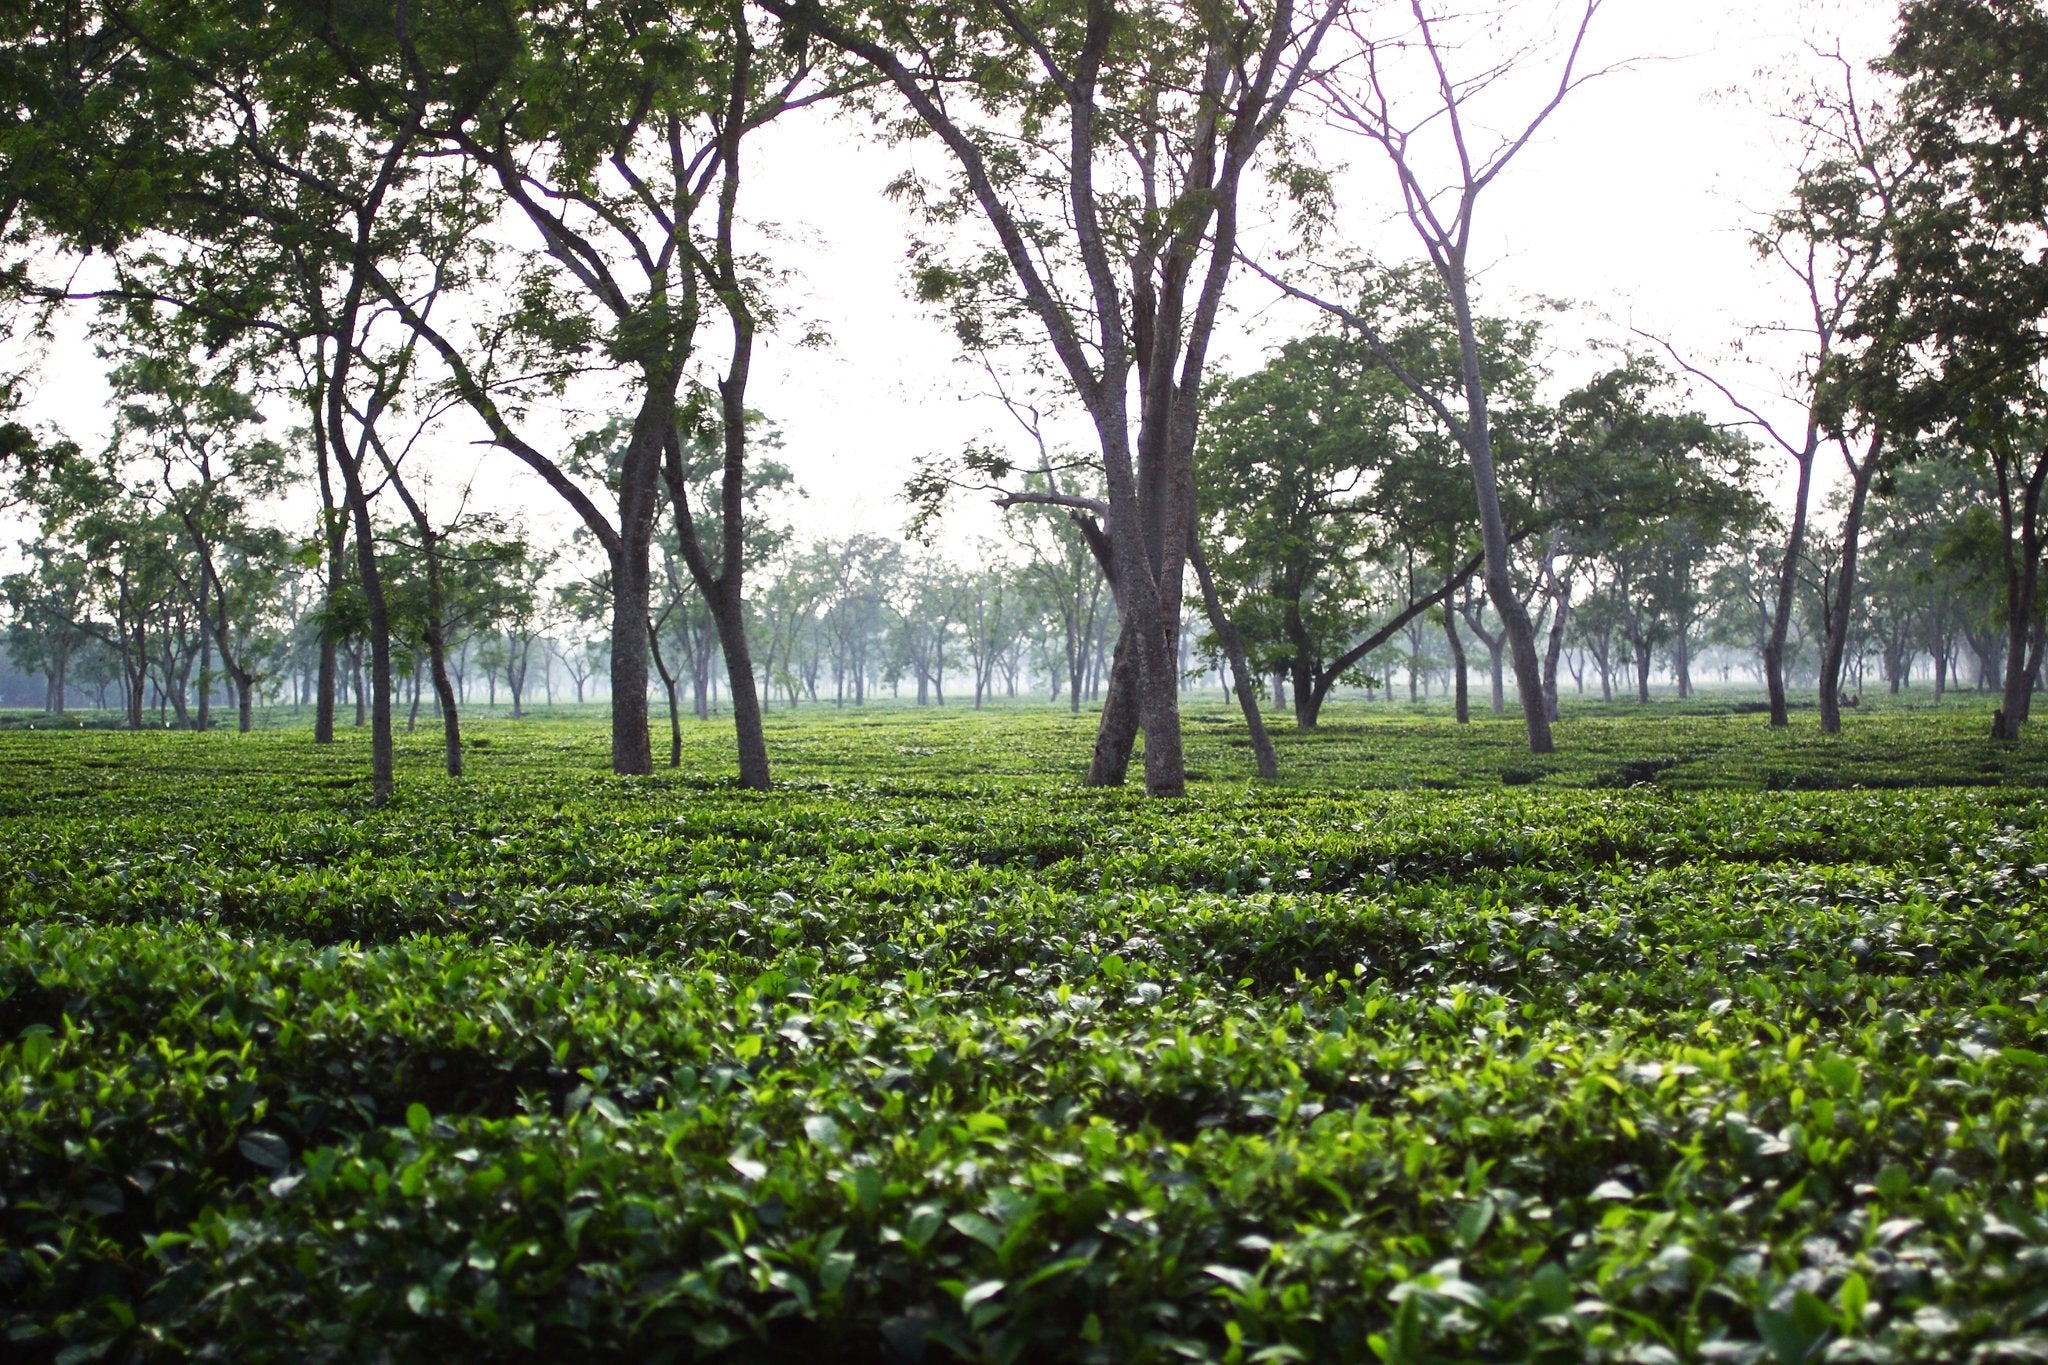 All About the Assam Tea Region